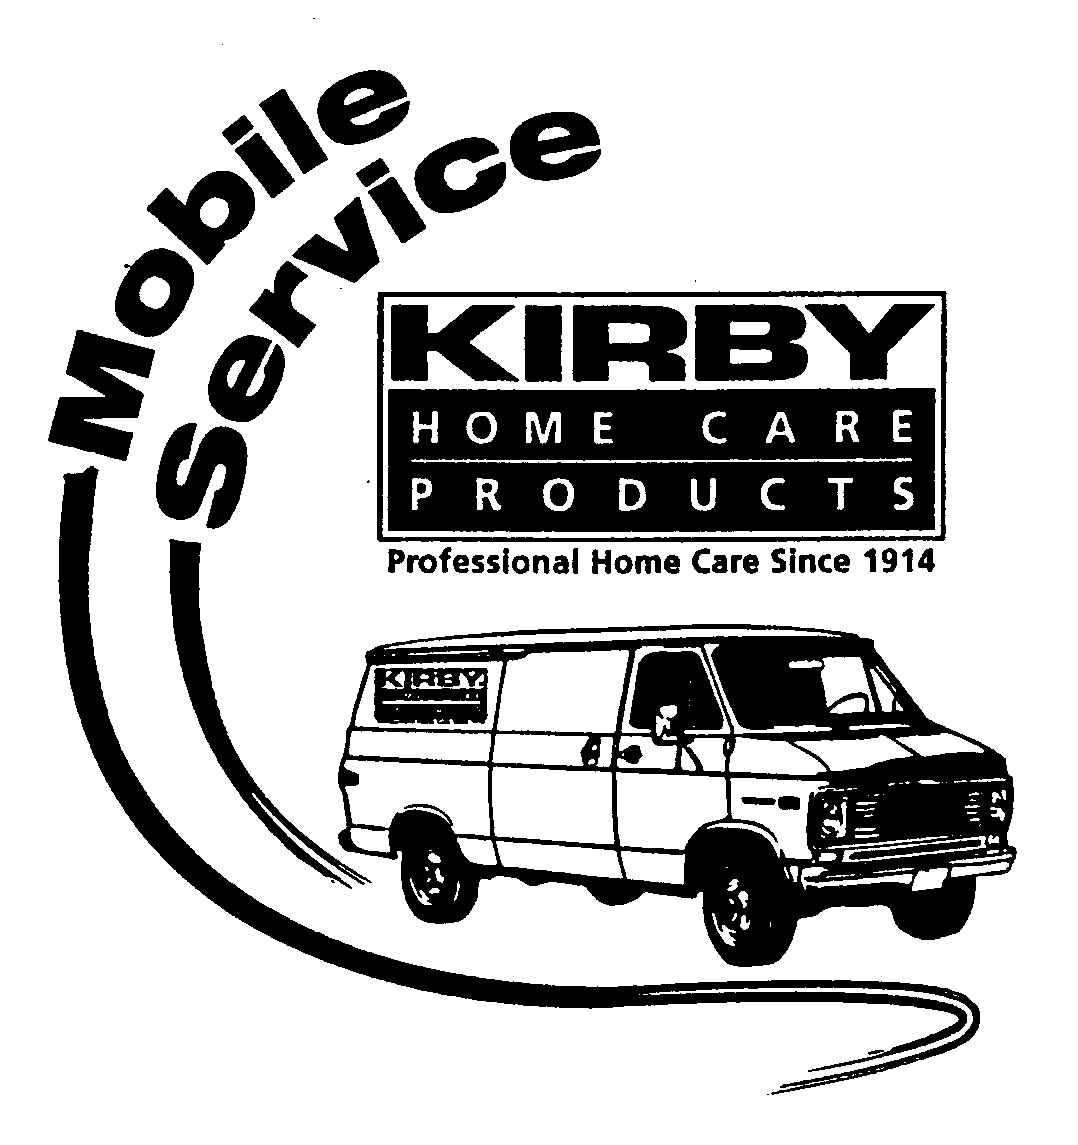  KIRBY HOME CARE PRODUCTS MOBILE SERVICE PROFESSIONAL HOME CARE SINCE 1914